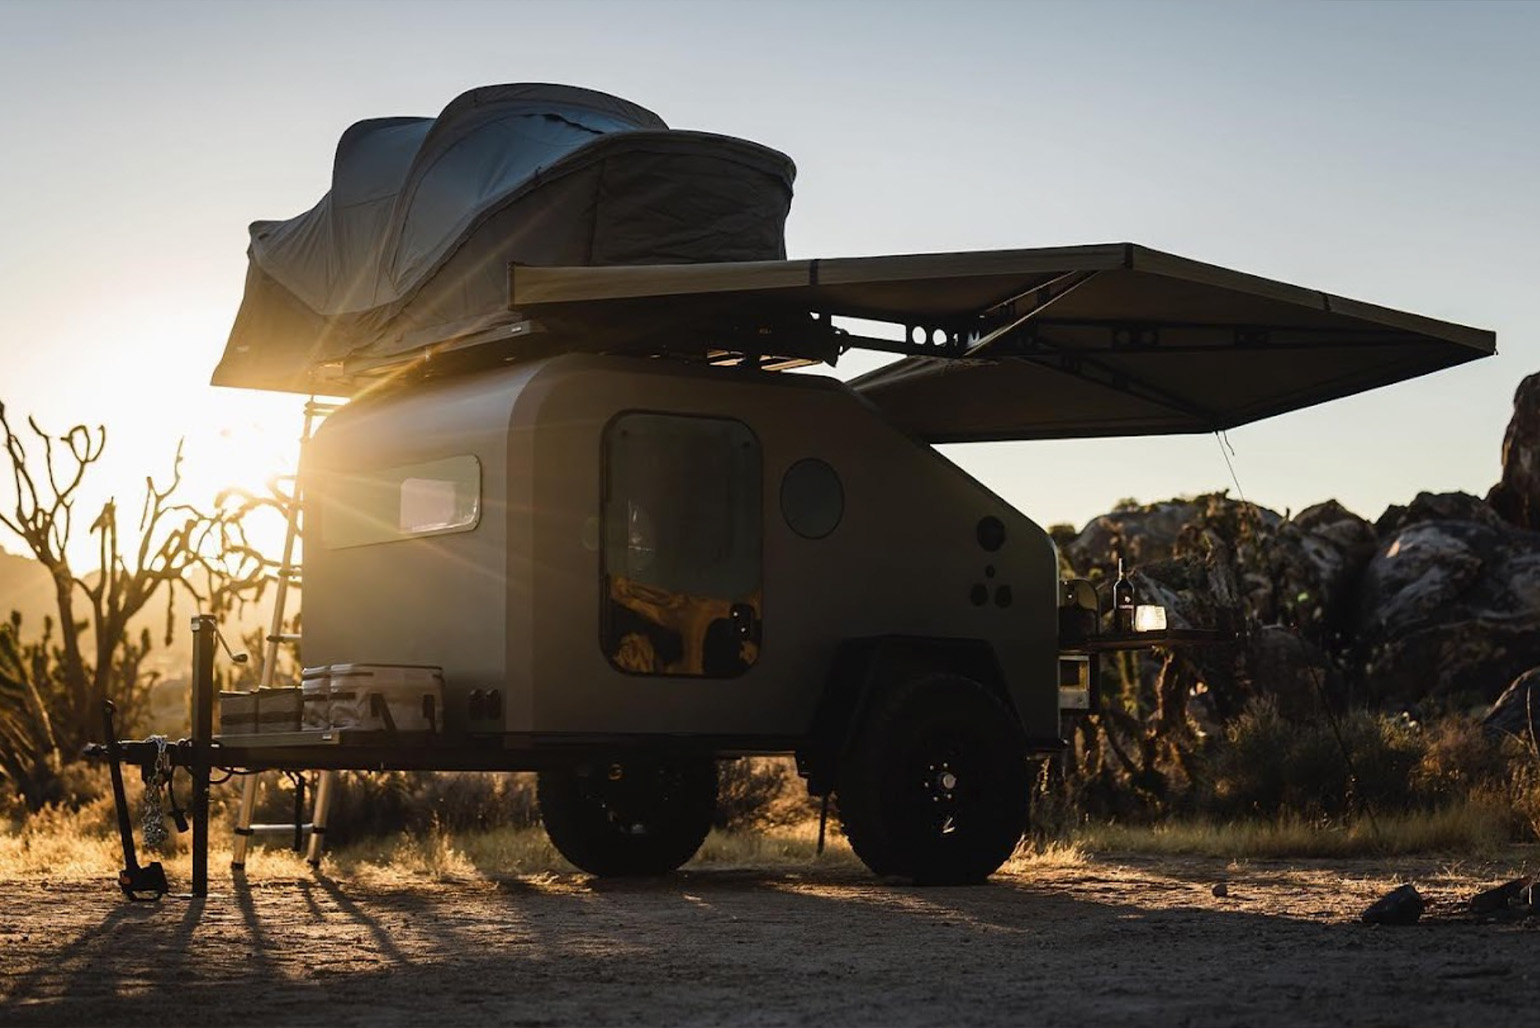 Campworks, the World’s First Fully Electric RV, Withdraws From RV Market, Enters Save the World Industry Instead